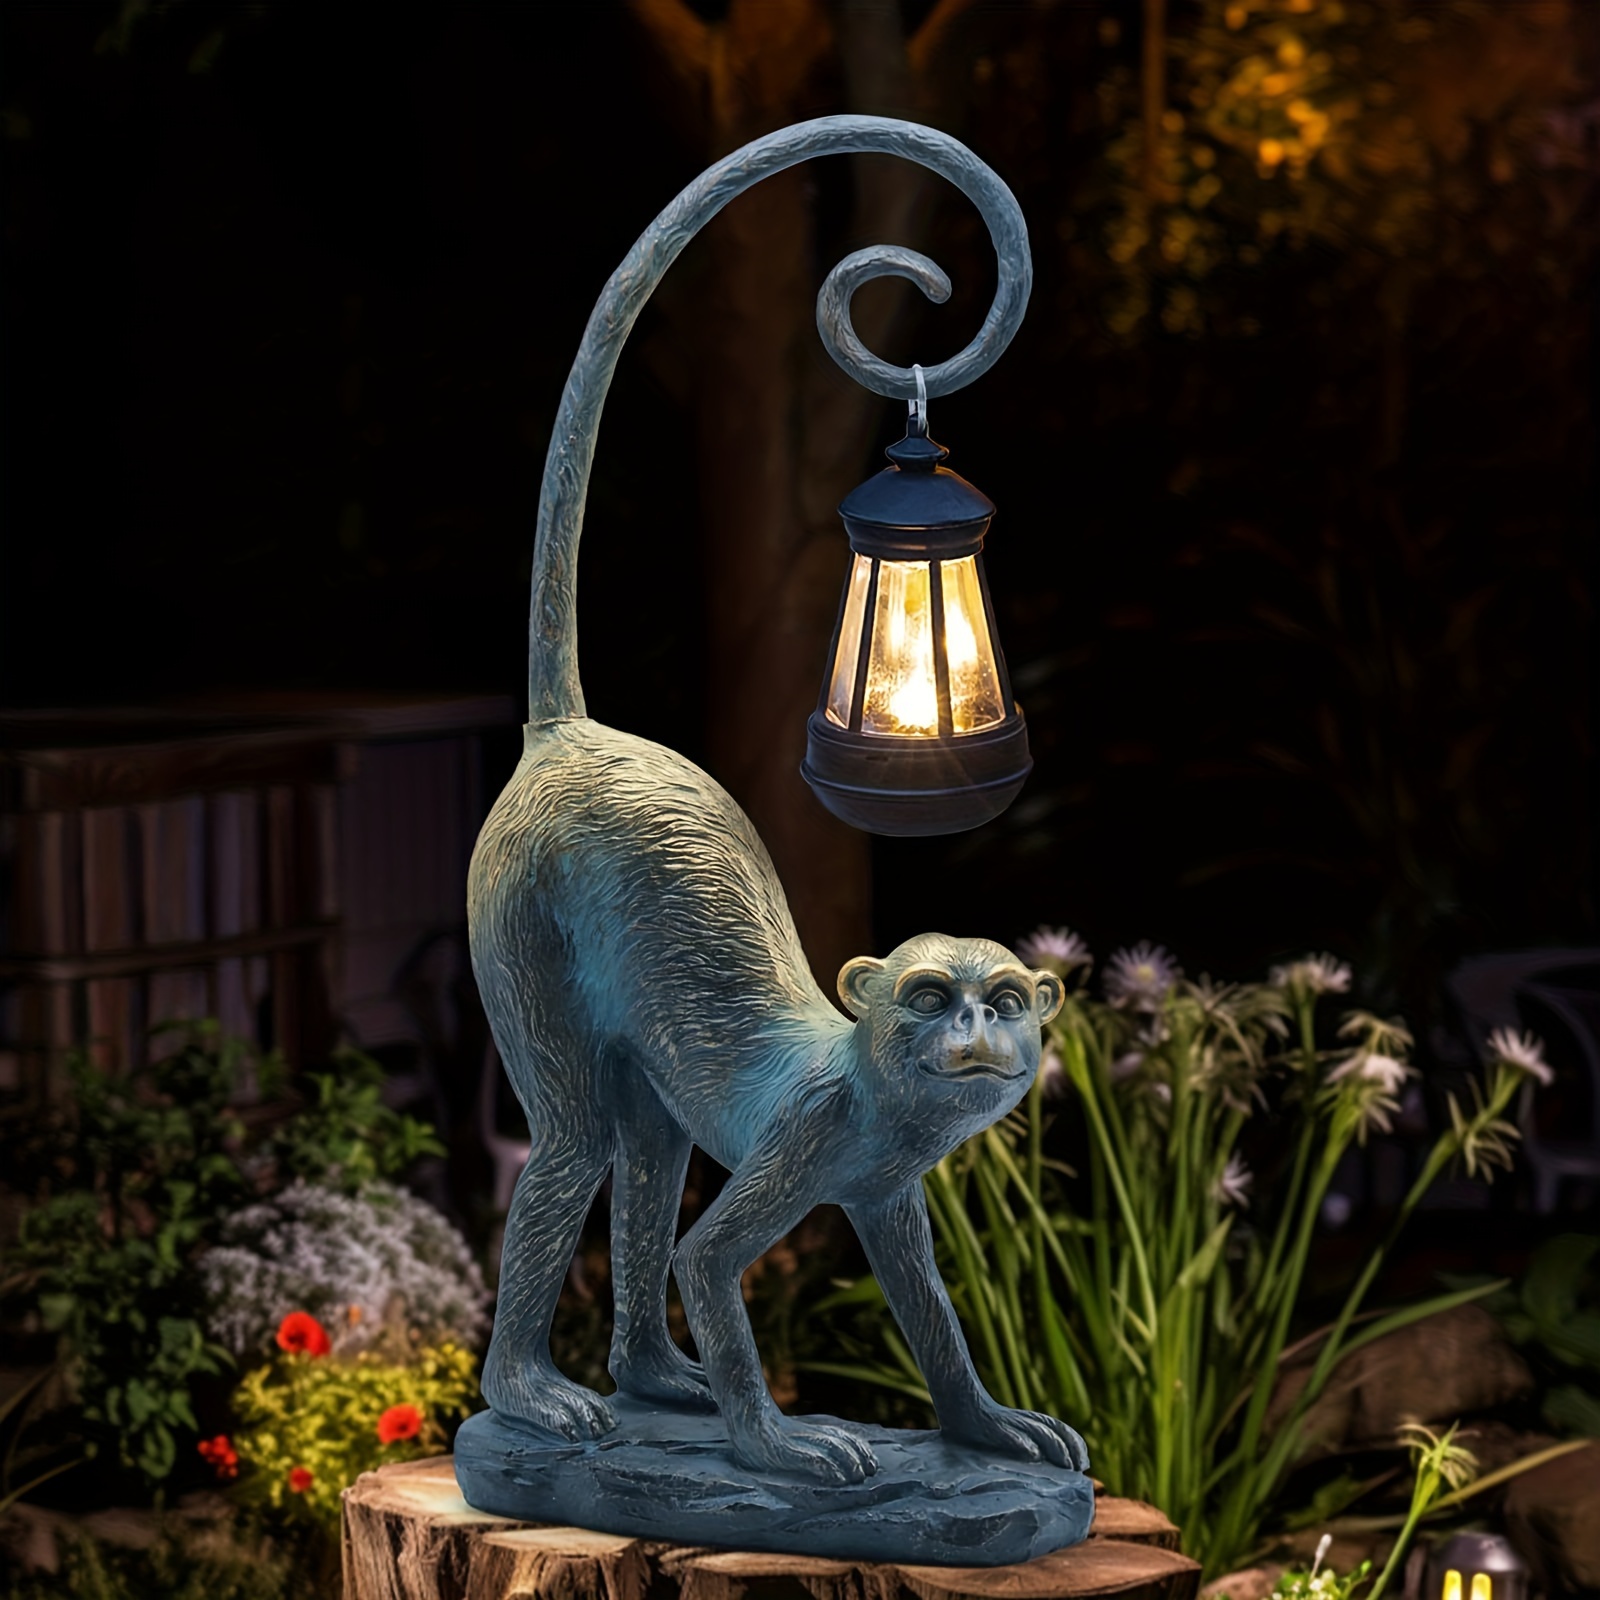 

Resin Monkey Statue With Solar Light - Whimsical Garden Decor, Good Luck Gifts For Women, Outdoor Statues Yard Decor For Patio, Porch, Home - Unique Housewarming Gifts